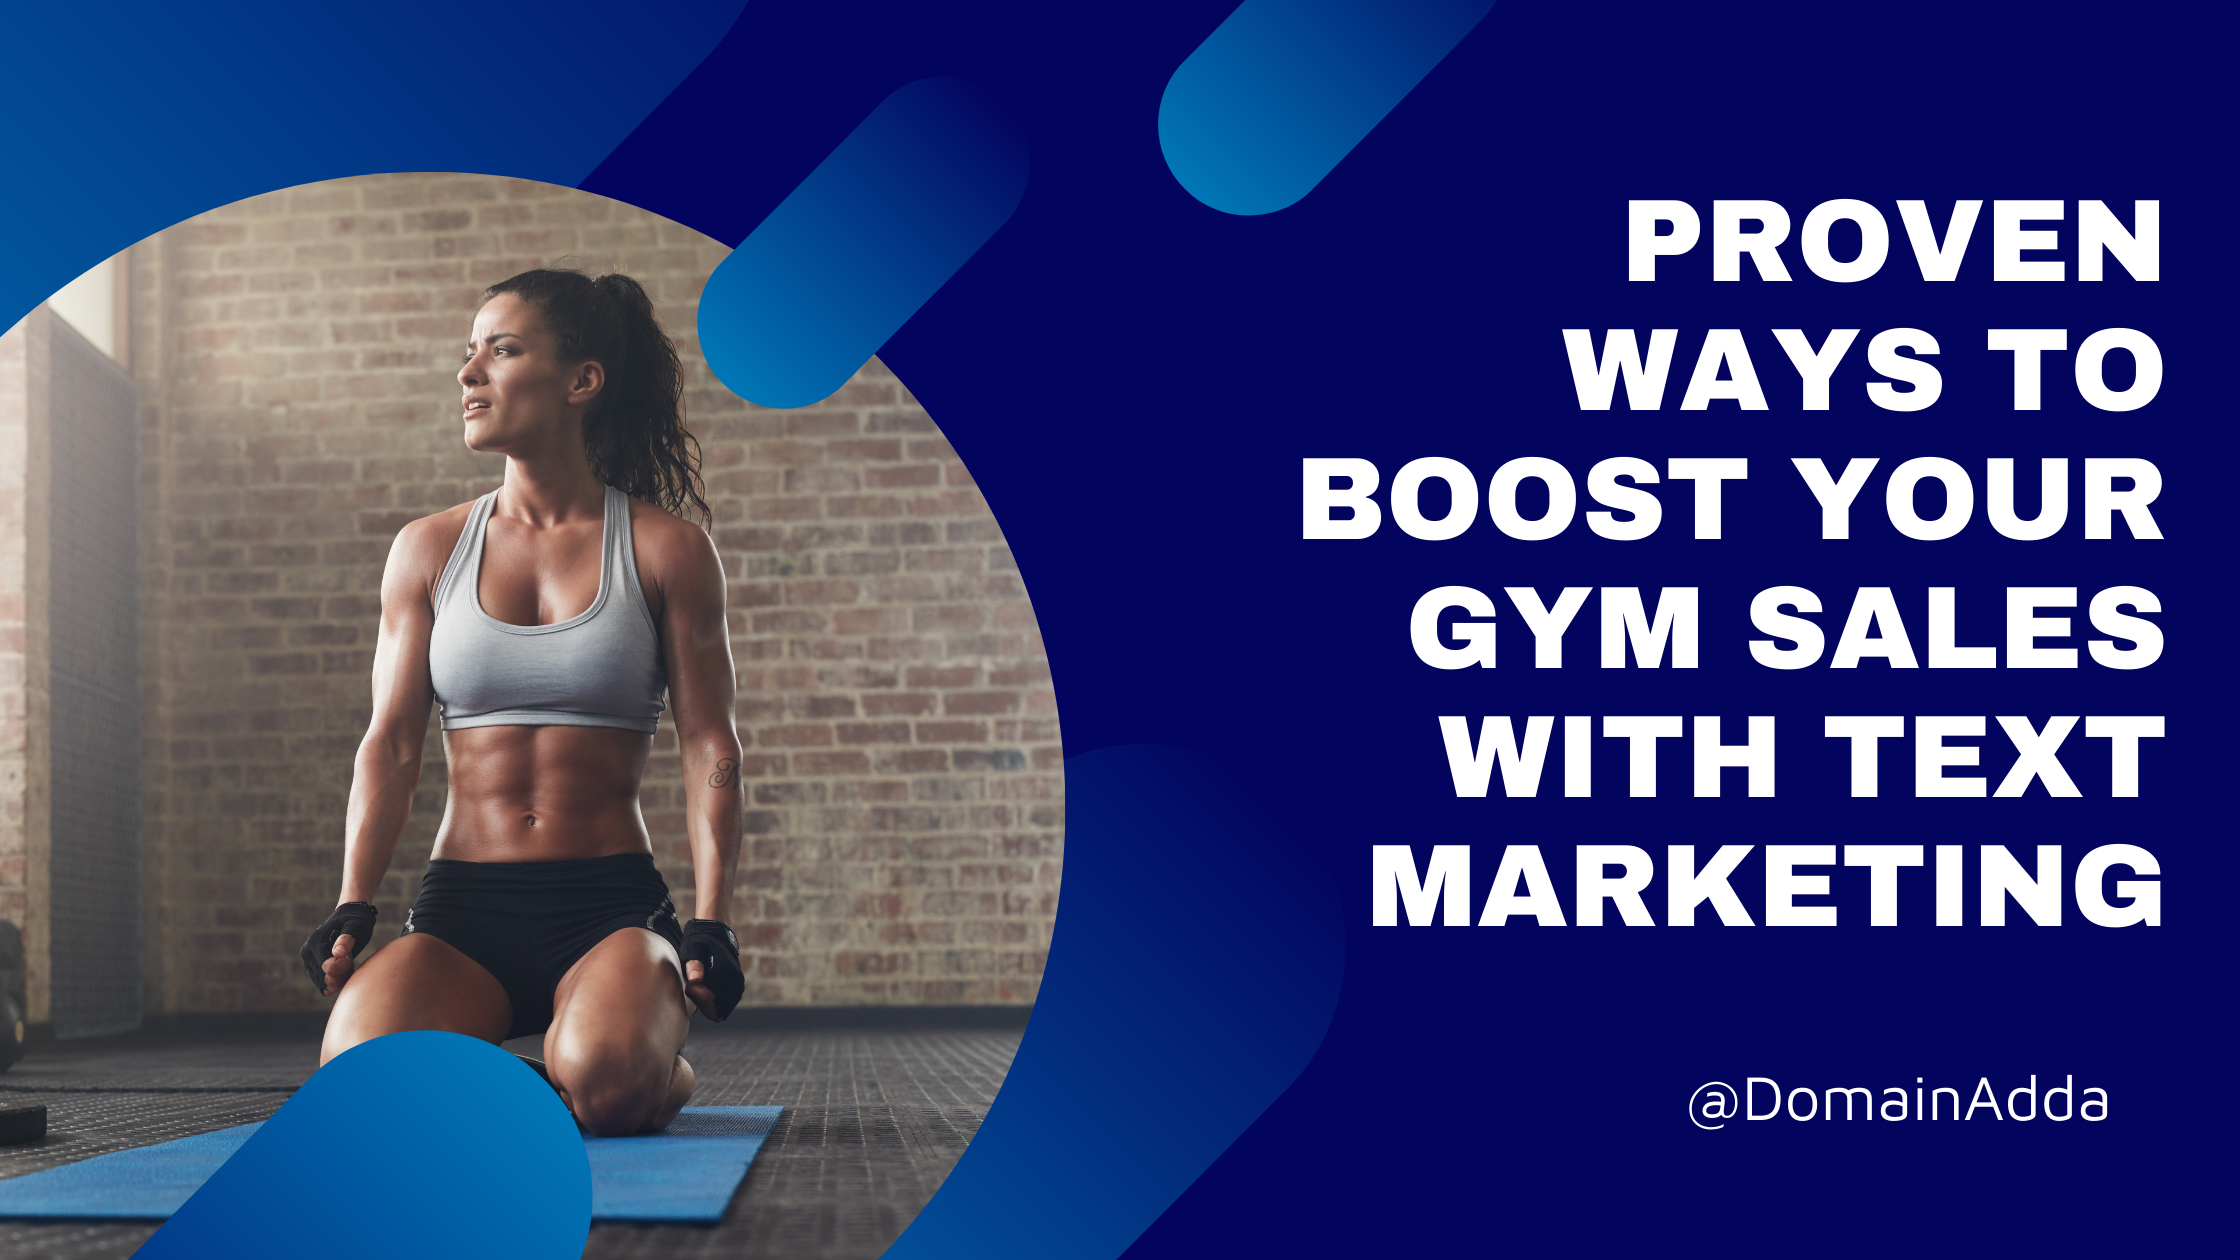 9 Proven Ways to Boost Your Gym Sales with Text Marketing